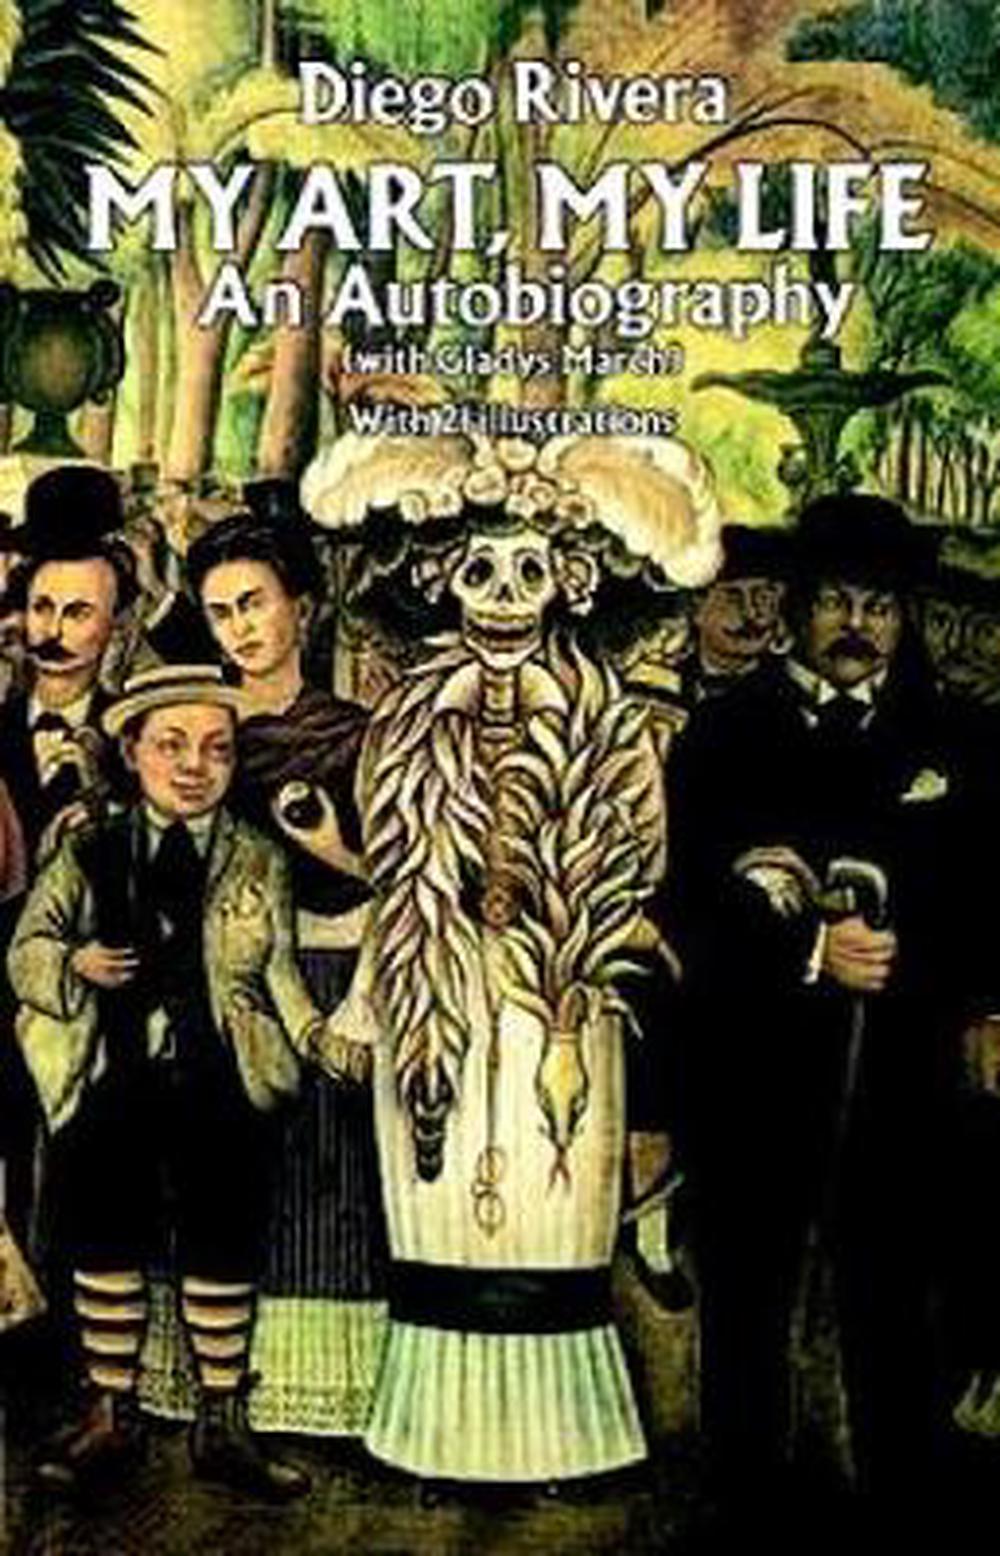 My Art, My Life An Autobiography by Diego Rivera (English) Paperback Book Free 9780486269382 eBay